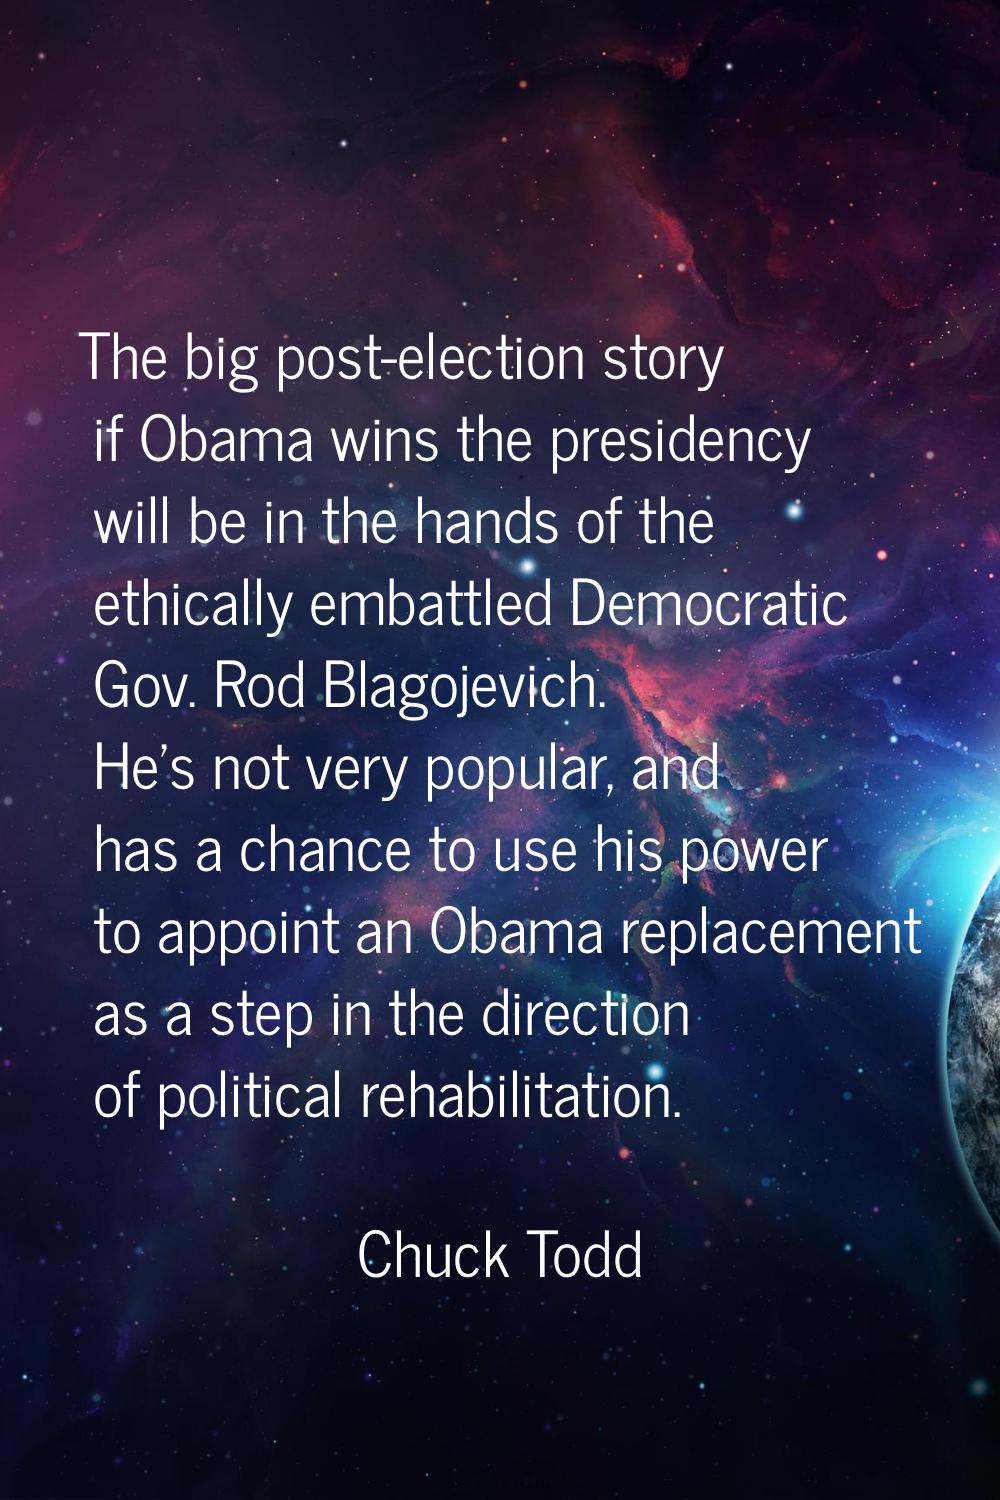 The big post-election story if Obama wins the presidency will be in the hands of the ethically emba